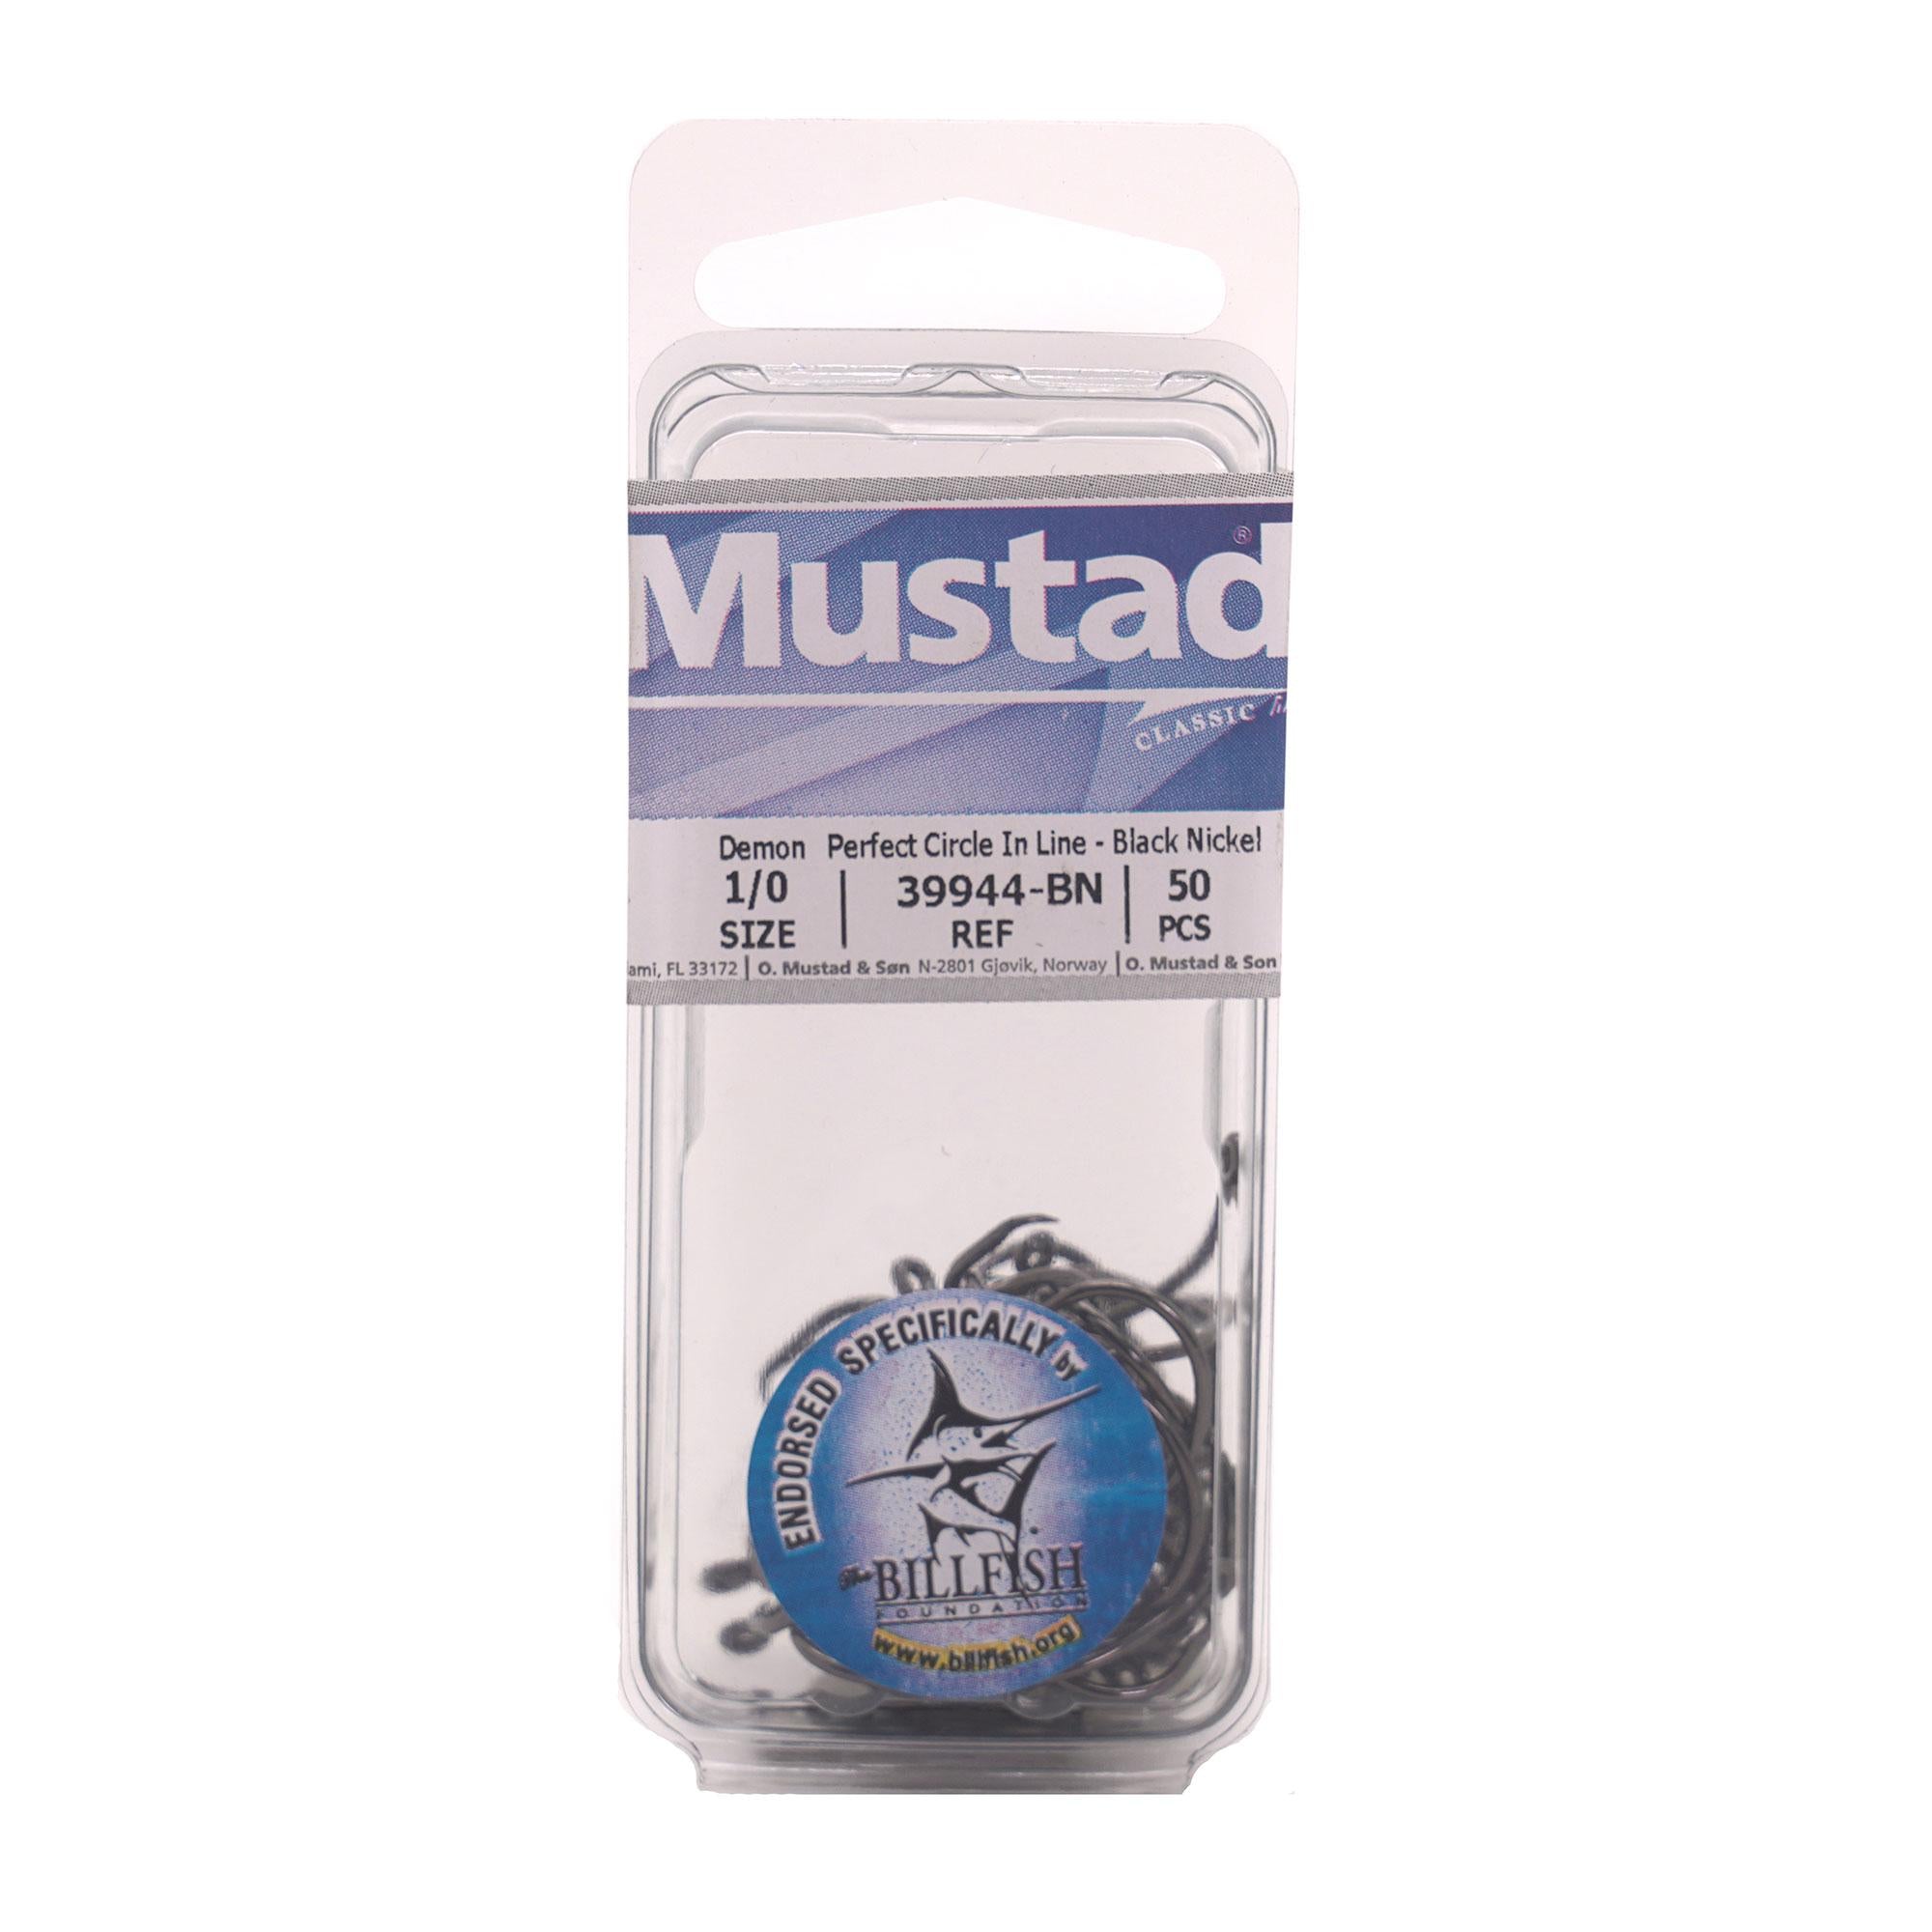 Mustad Classic 39944 Standard Wire Demon Perfect in Line Wide Gap Circle  Hook  Saltwater Freshwater Hooks for Tuna, Catfish, Bass and More, [Size  7/0, Pack of 50], Black Nickel, Hooks -  Canada